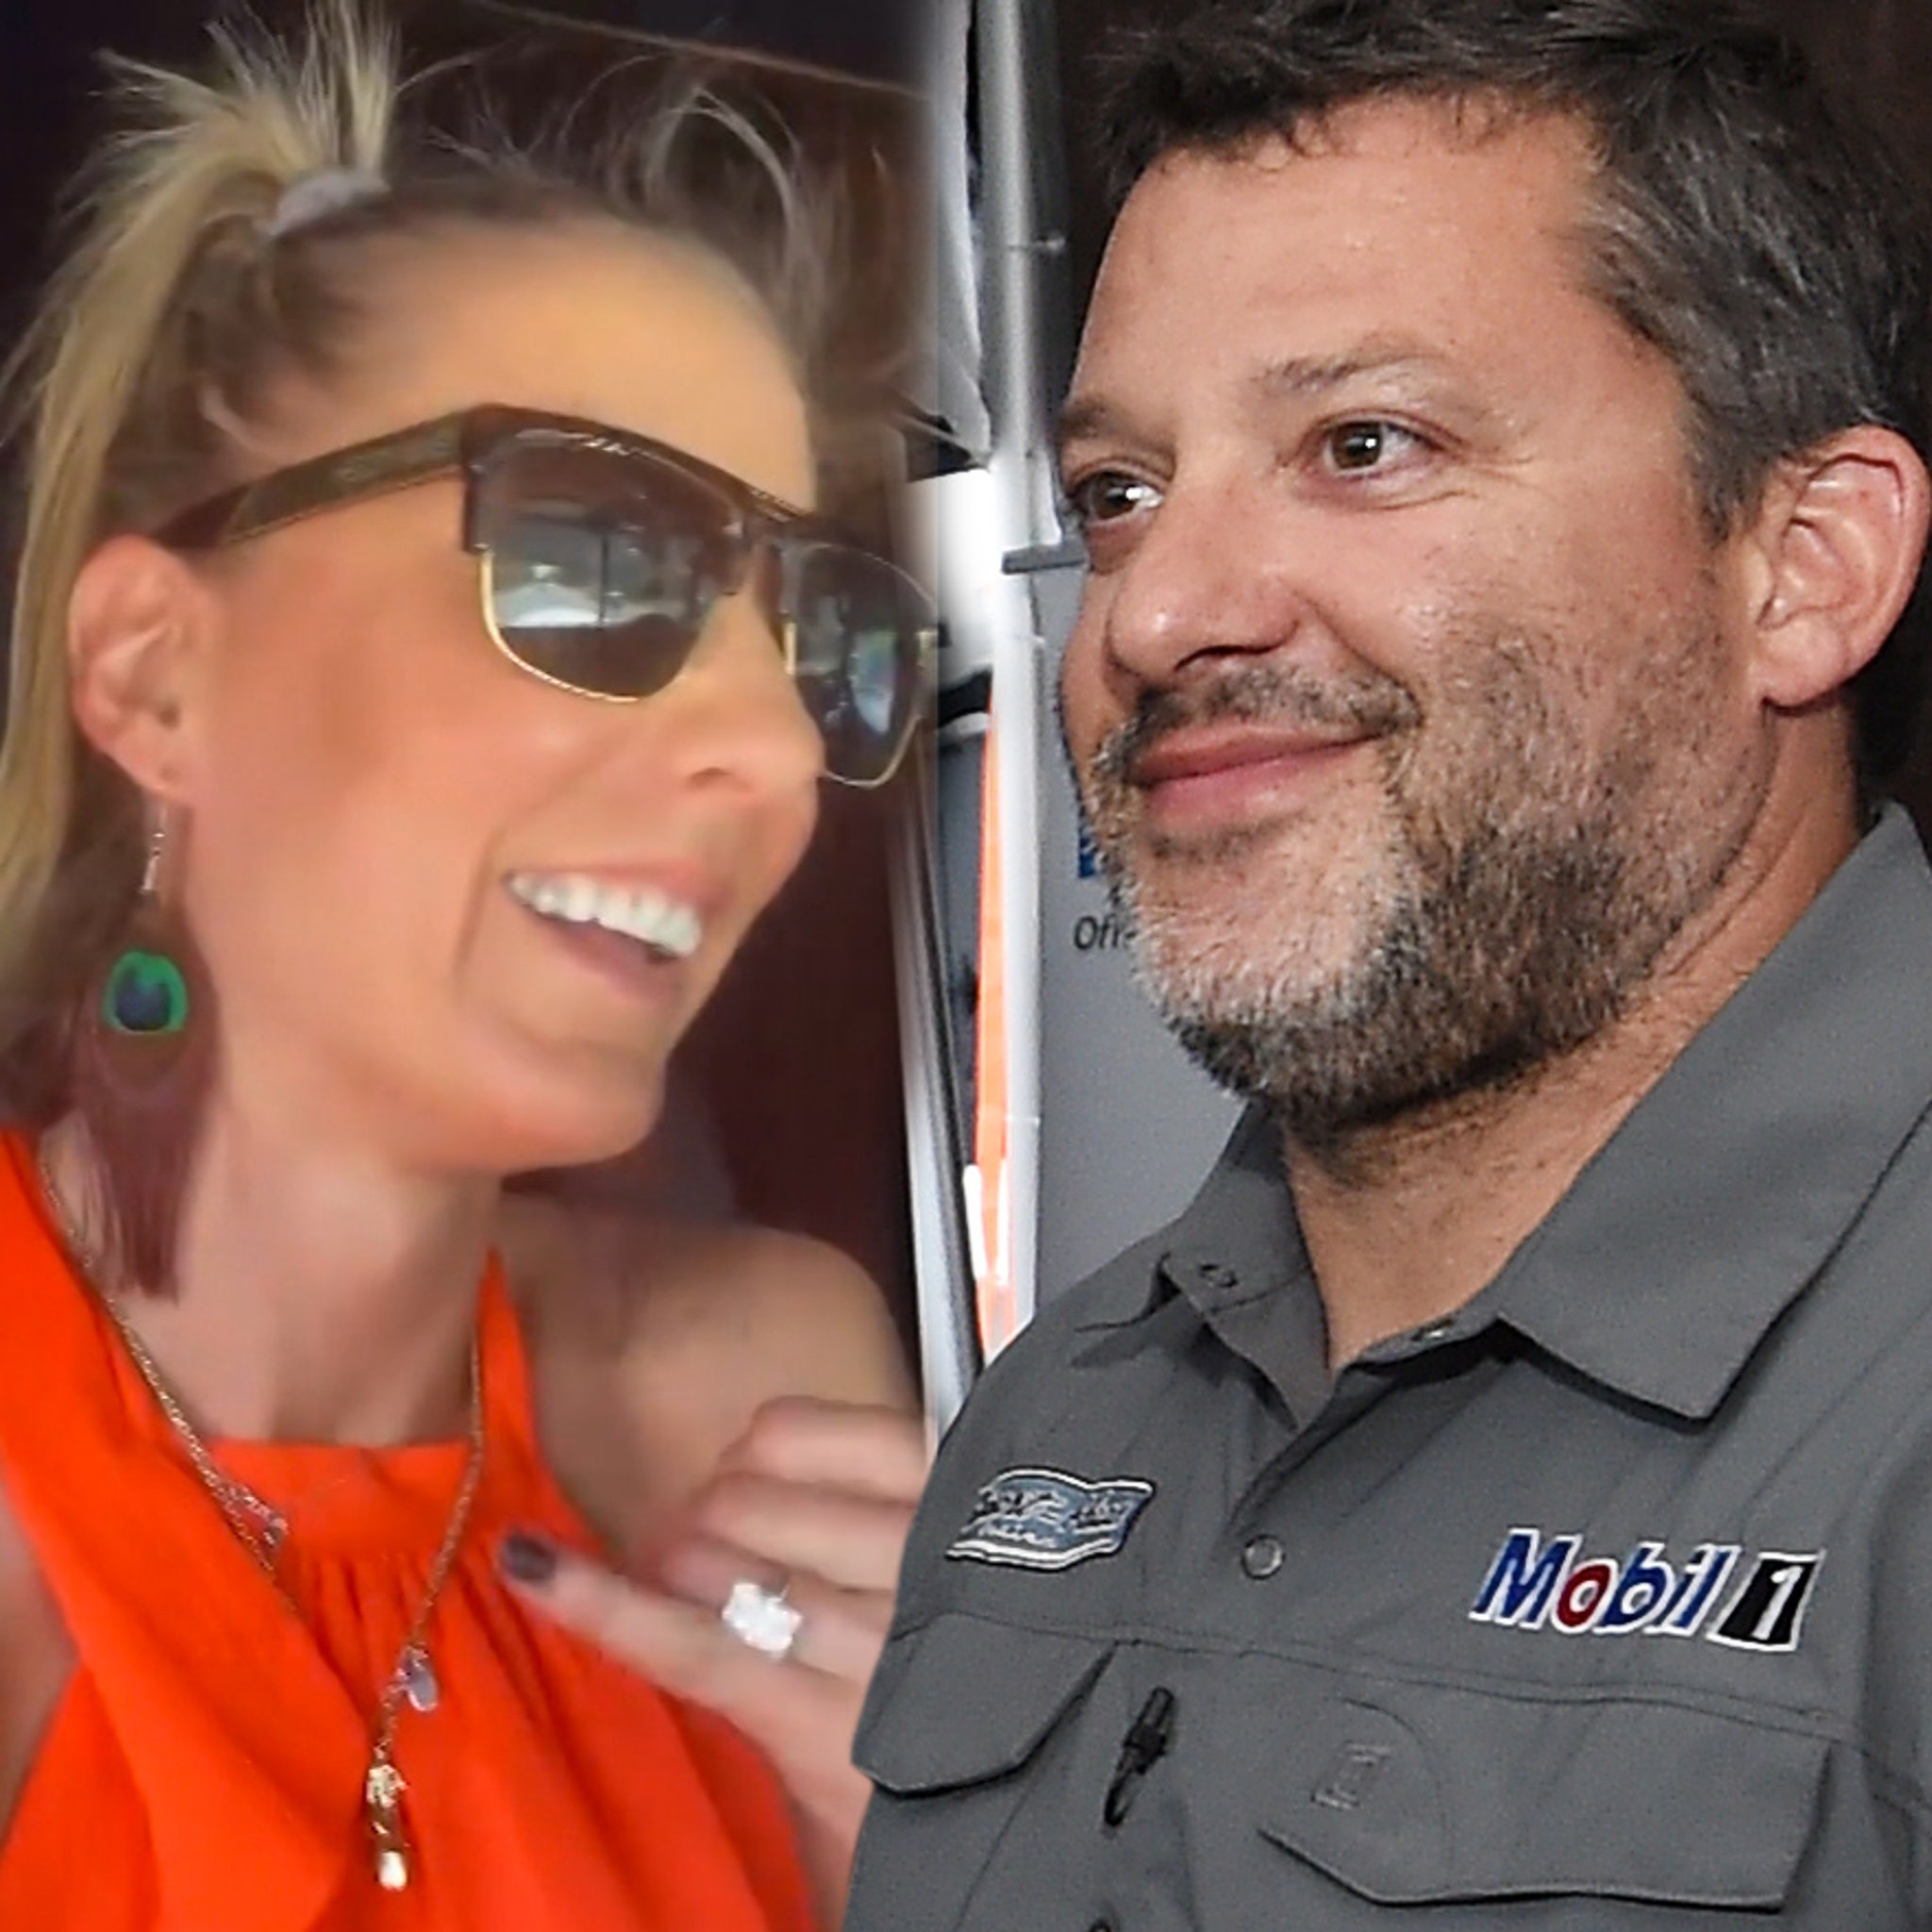 Leah Pruett to start family with Tony Stewart, who will drive her